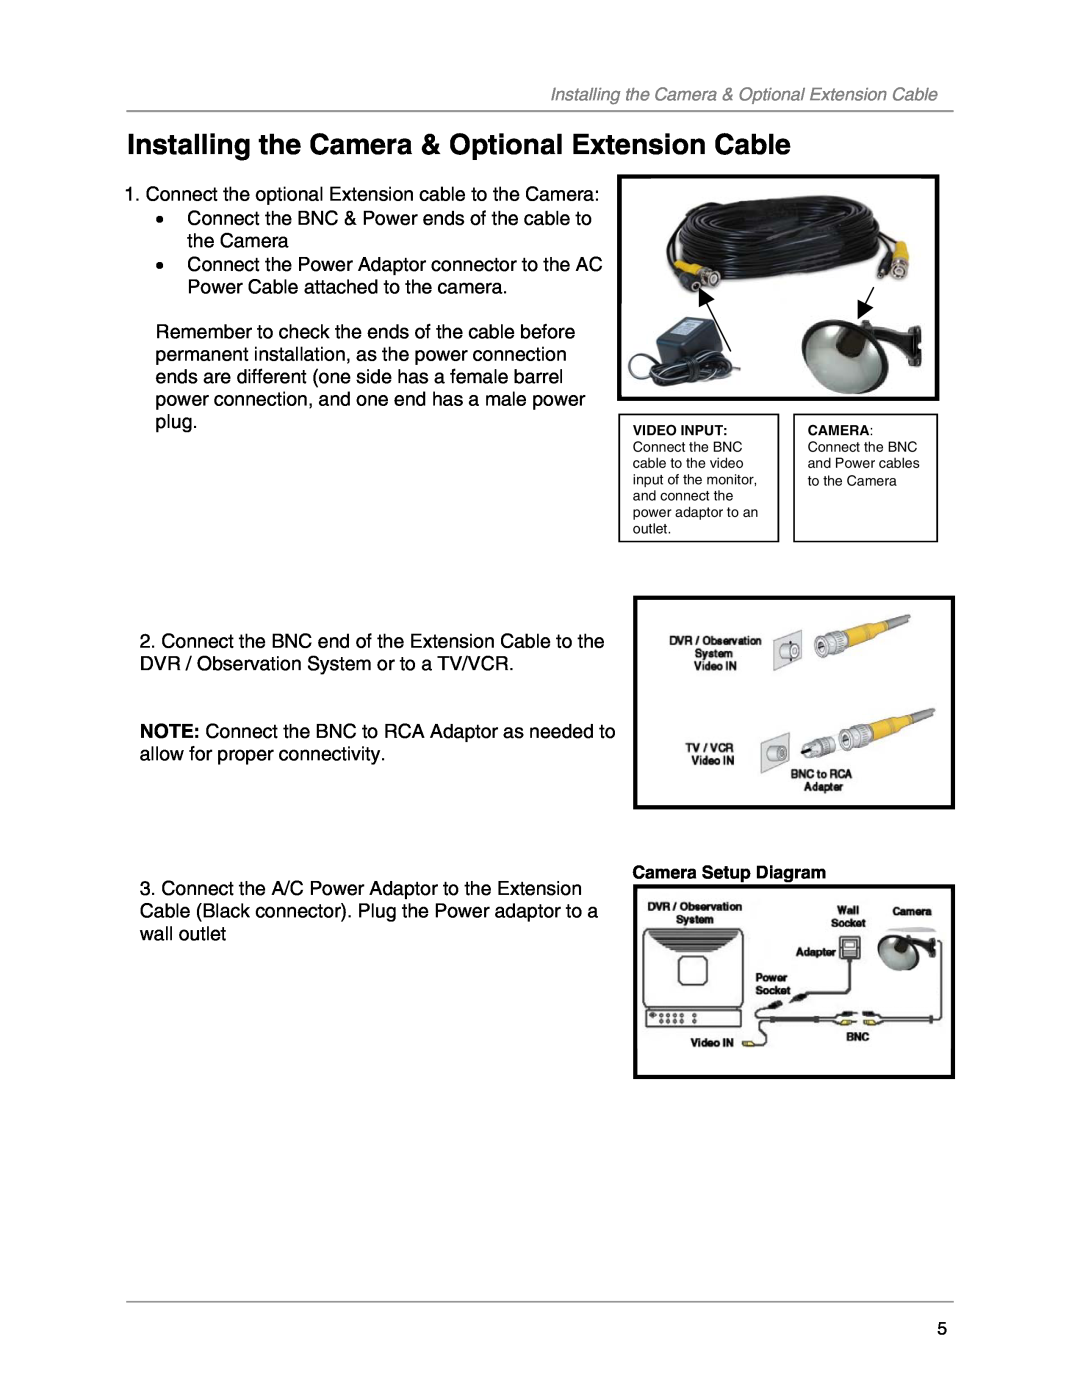 LOREX Technology CNC1020, DCC1020 warranty Installing the Camera & Optional Extension Cable, Camera Setup Diagram 